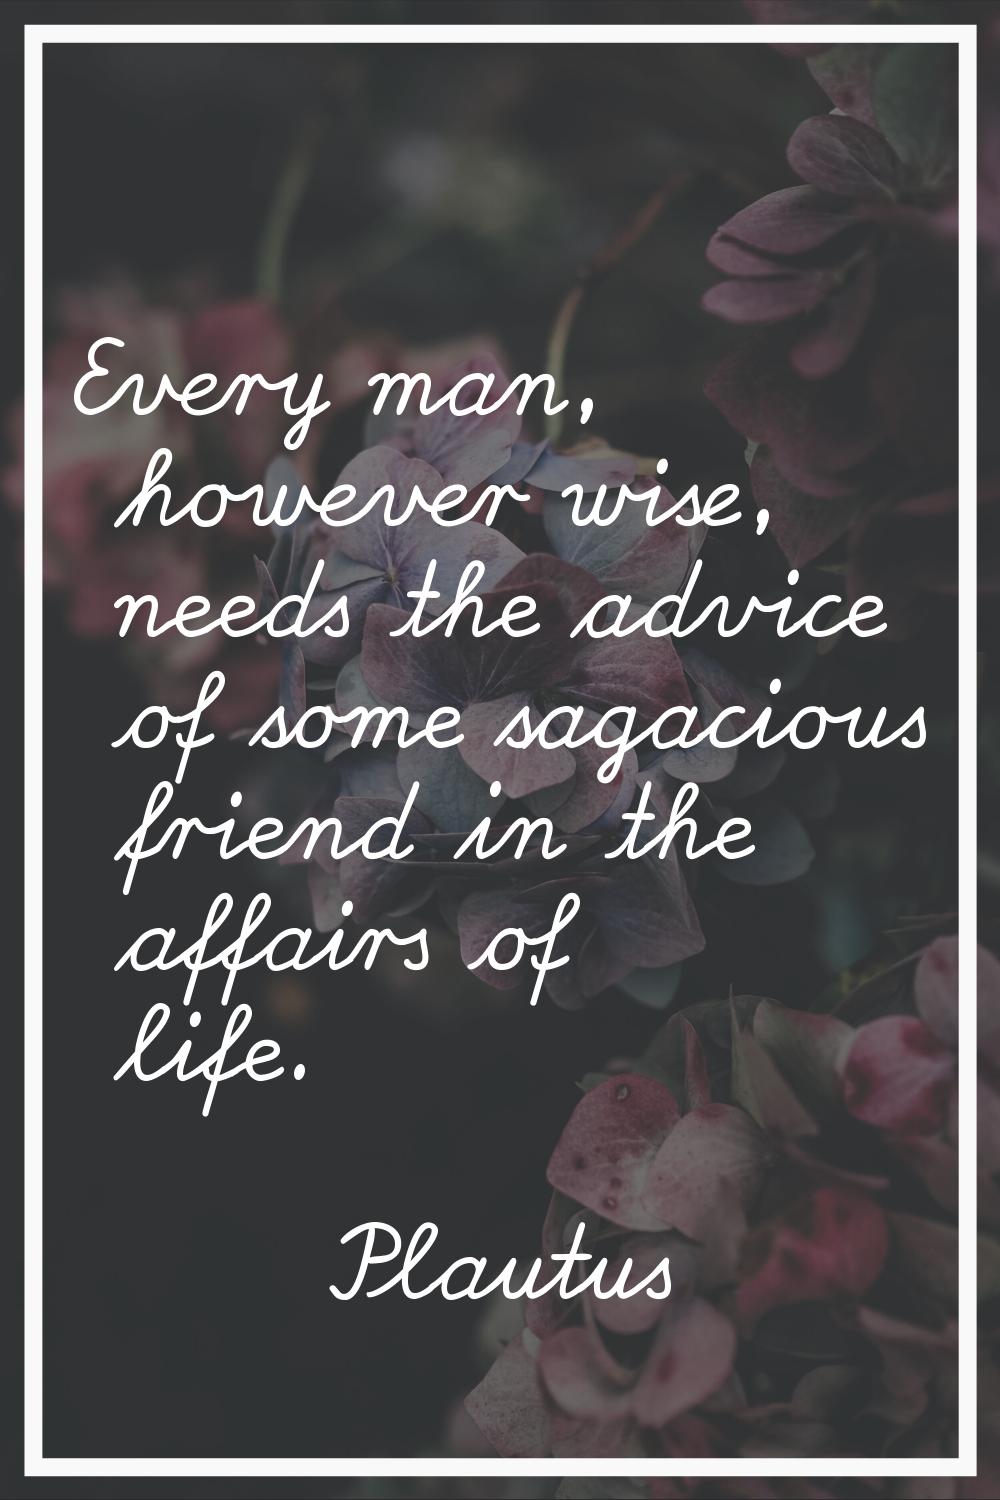 Every man, however wise, needs the advice of some sagacious friend in the affairs of life.